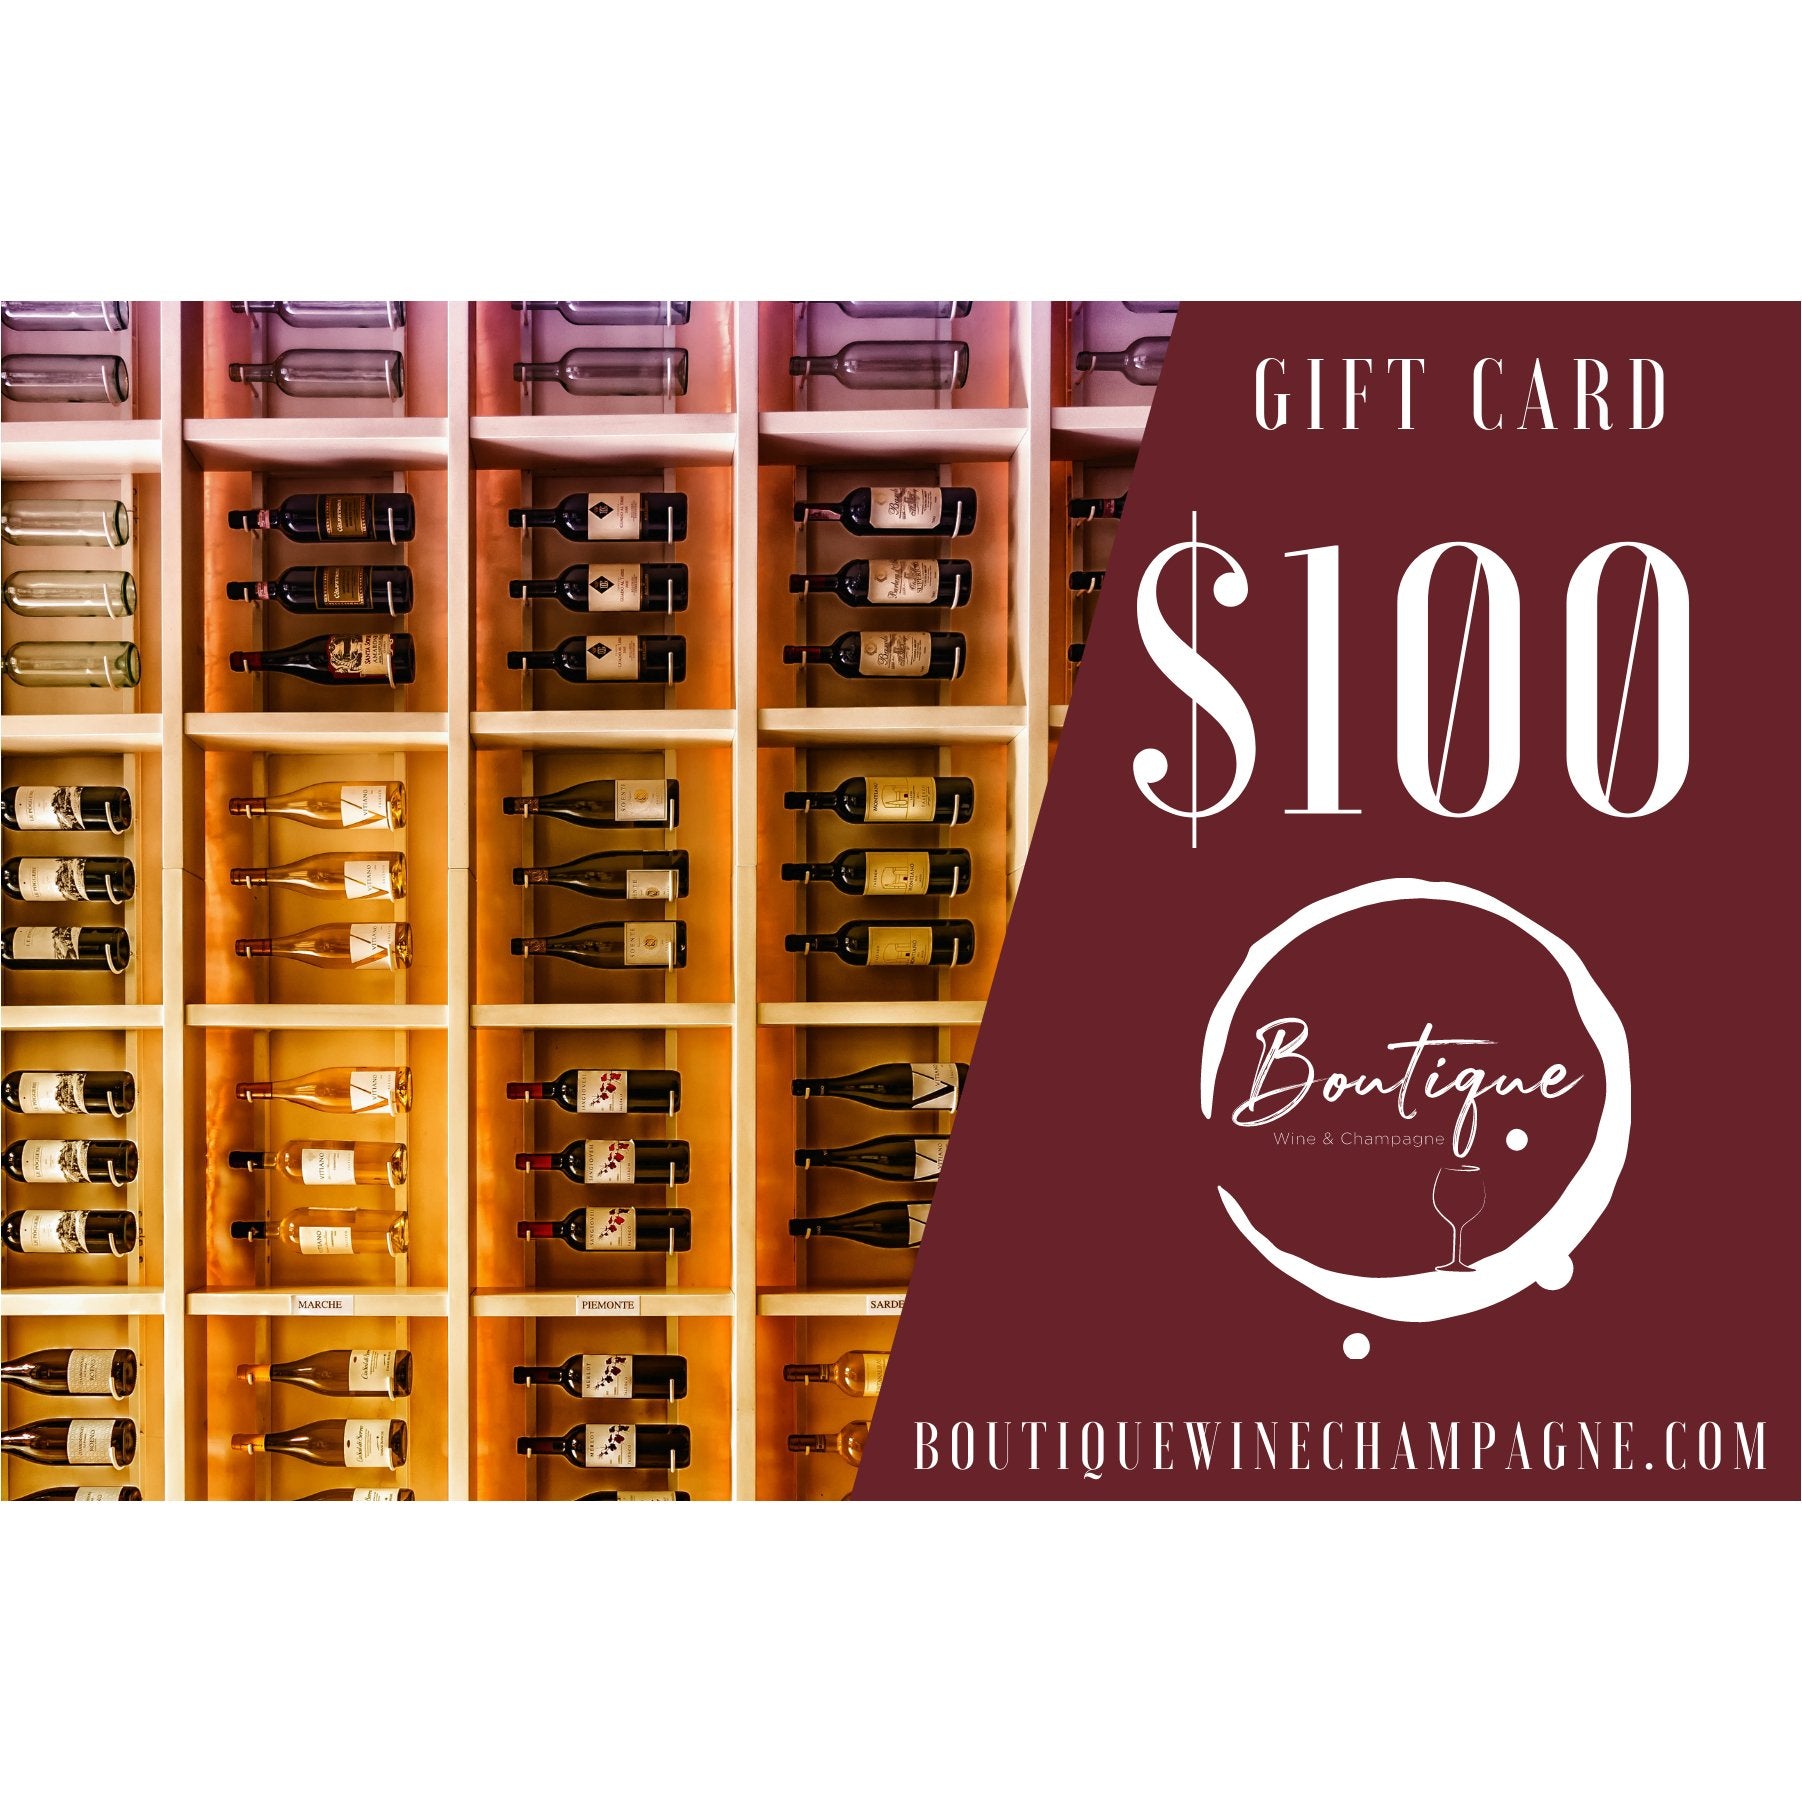 $100 GIFT CARD - Boutique Wine and Champagne